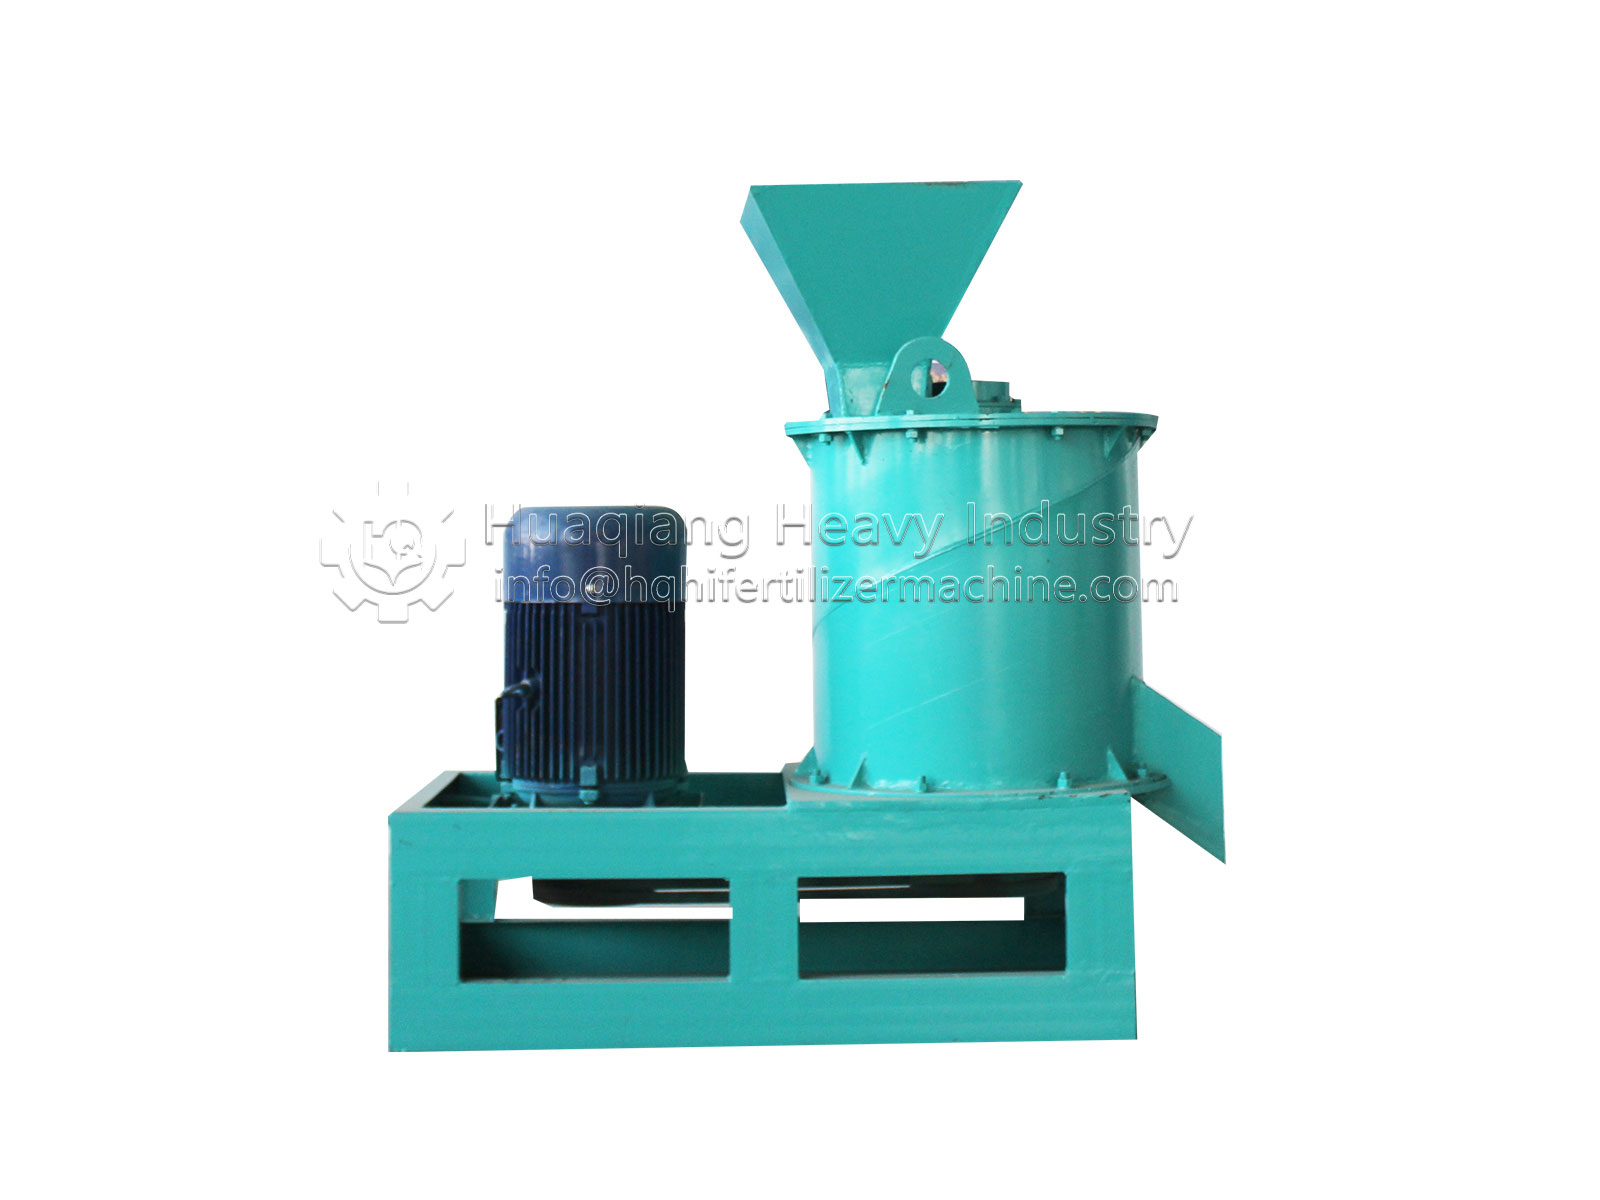 Reliable and safe organic fertilizer crusher